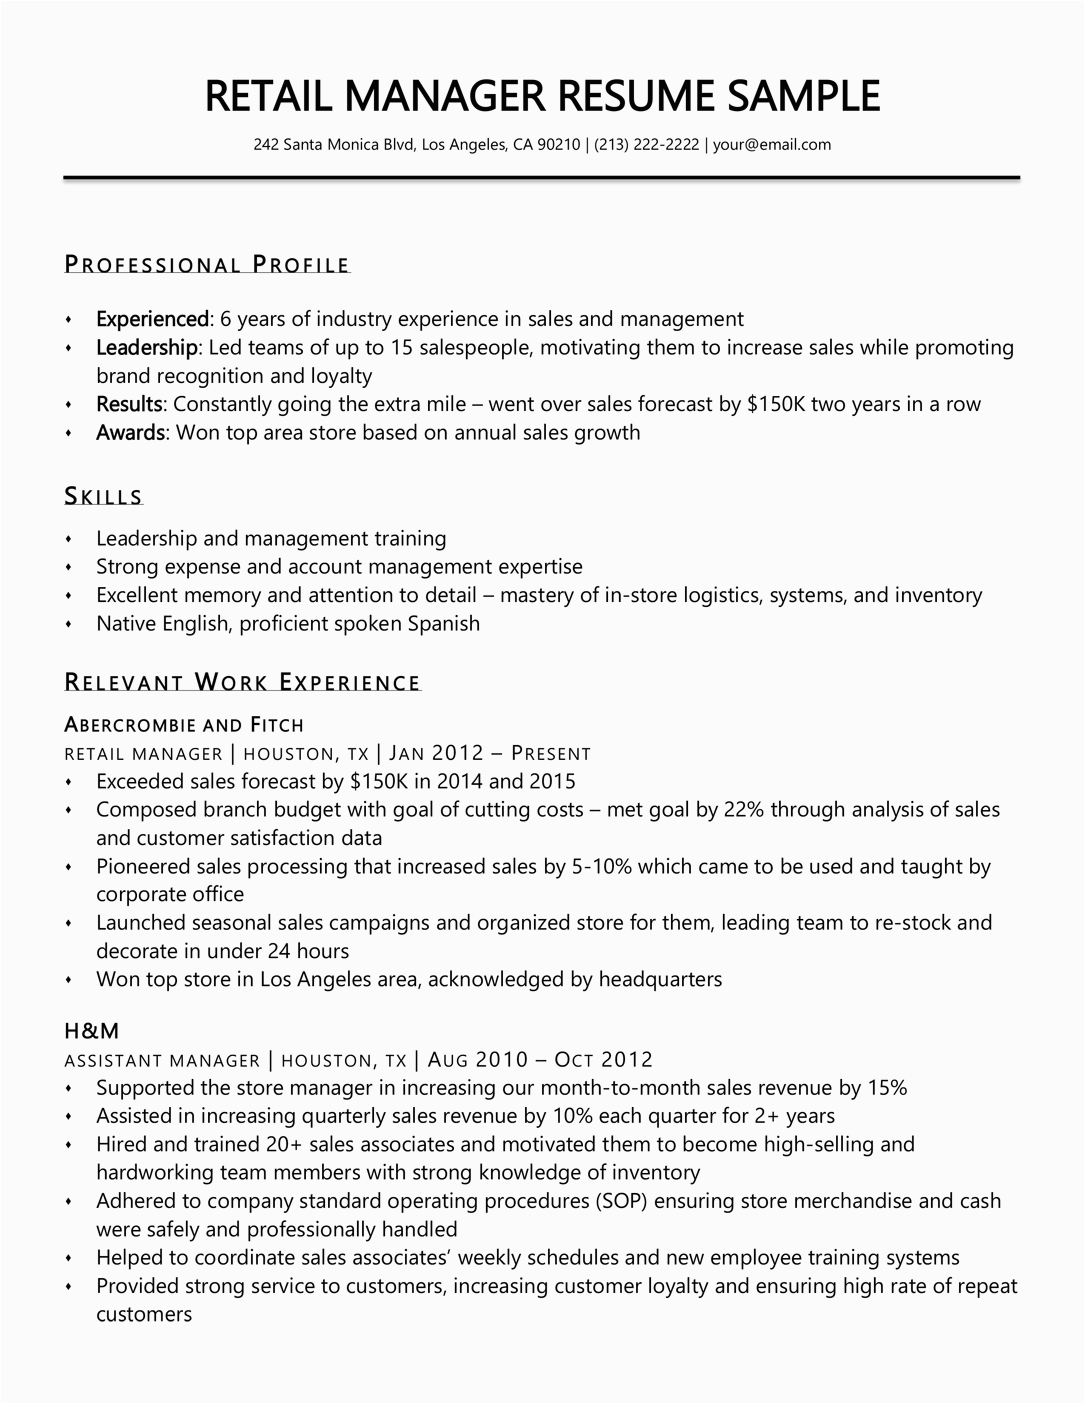 Sample Resume for top Management Position Retail Manager Resume Sample & Writing Tips